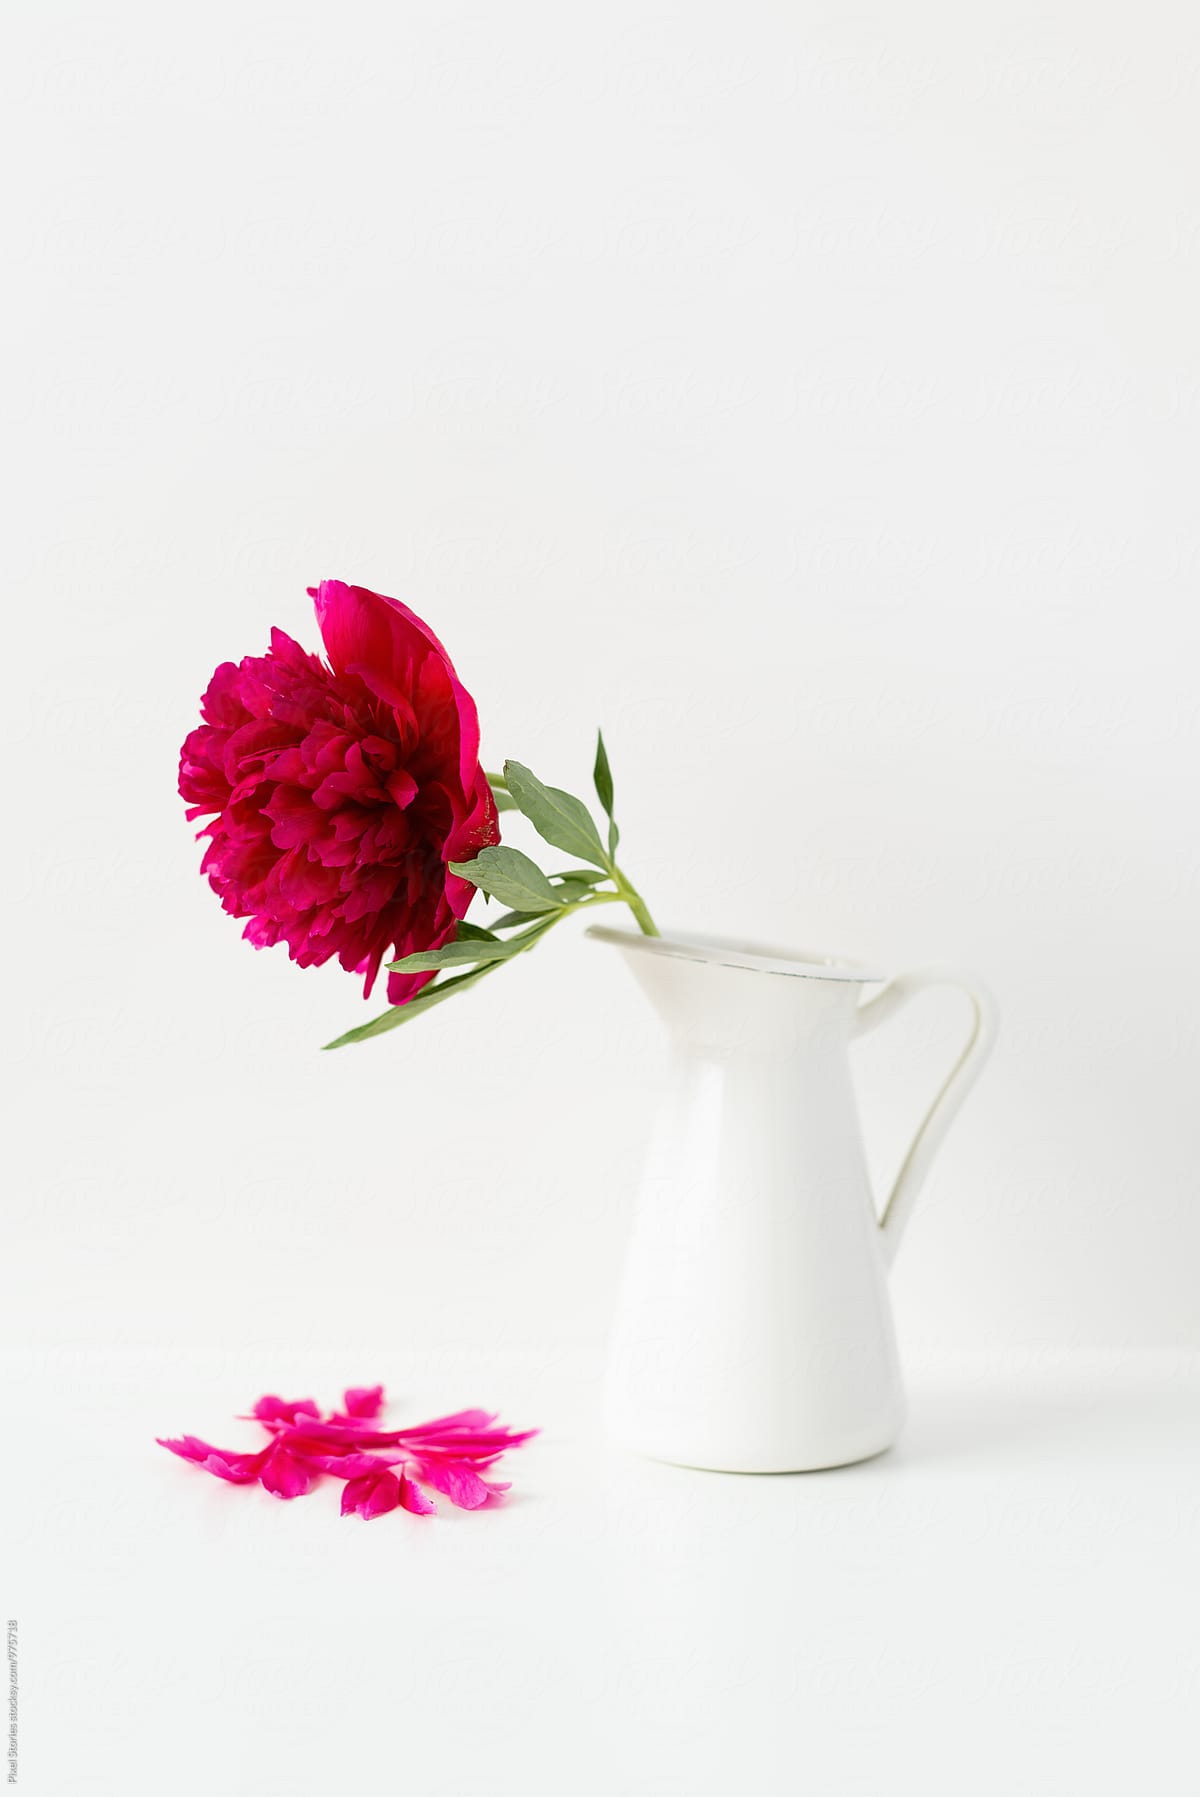 Single peony flower in a pitcher with fallen petals